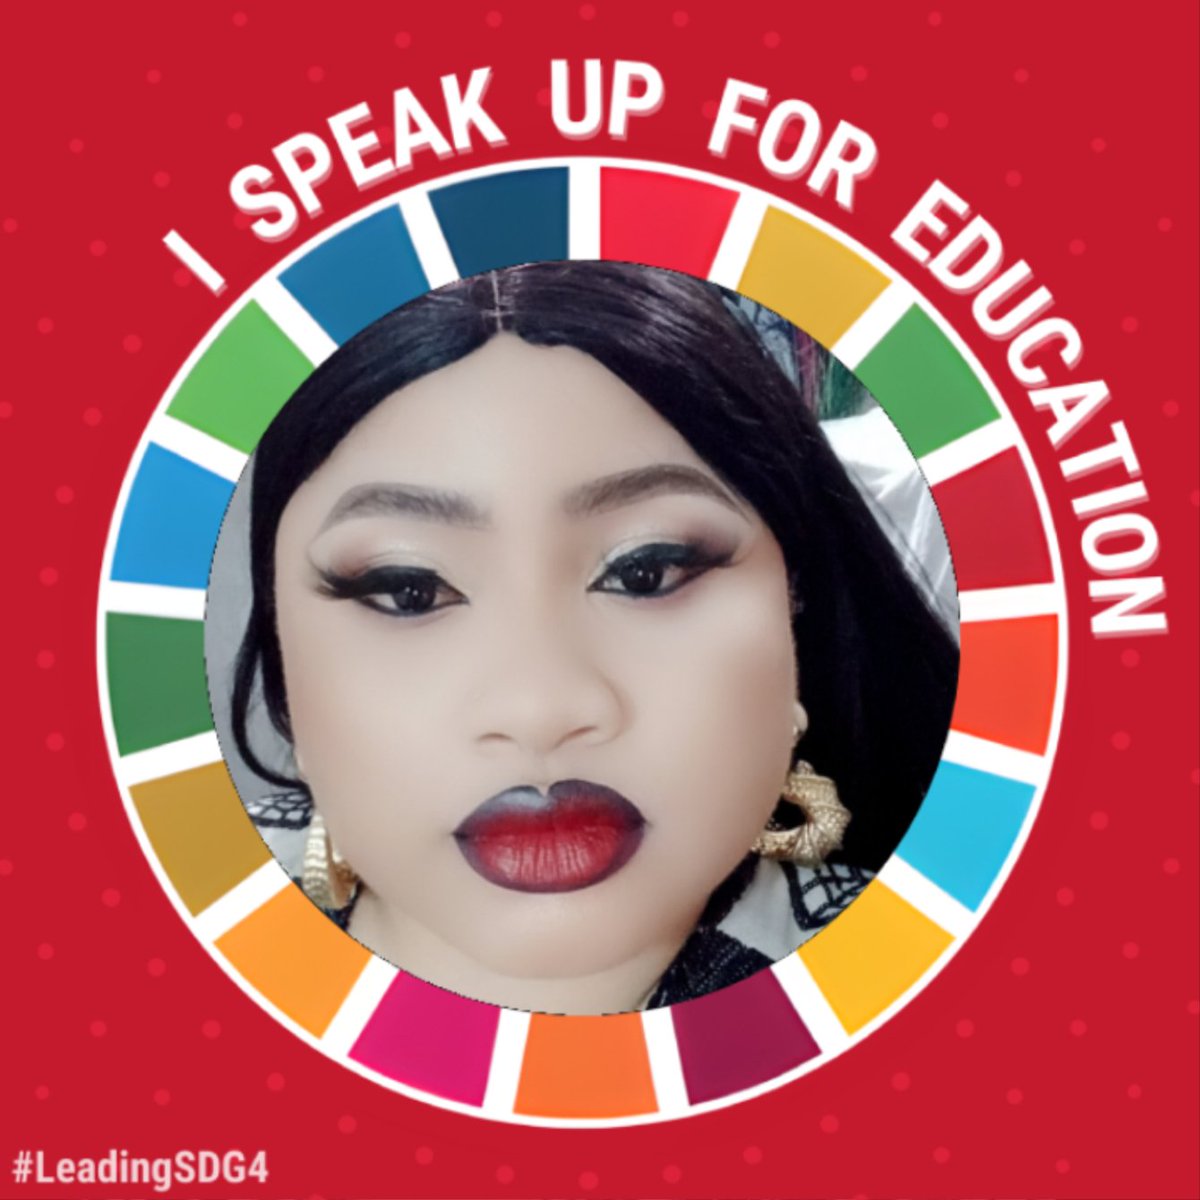 This #EducationDay

As a scholar and an active Volunteer for @1African_Child i call on world leaders to invest in education. Join me in #LeadingSDG4 now!